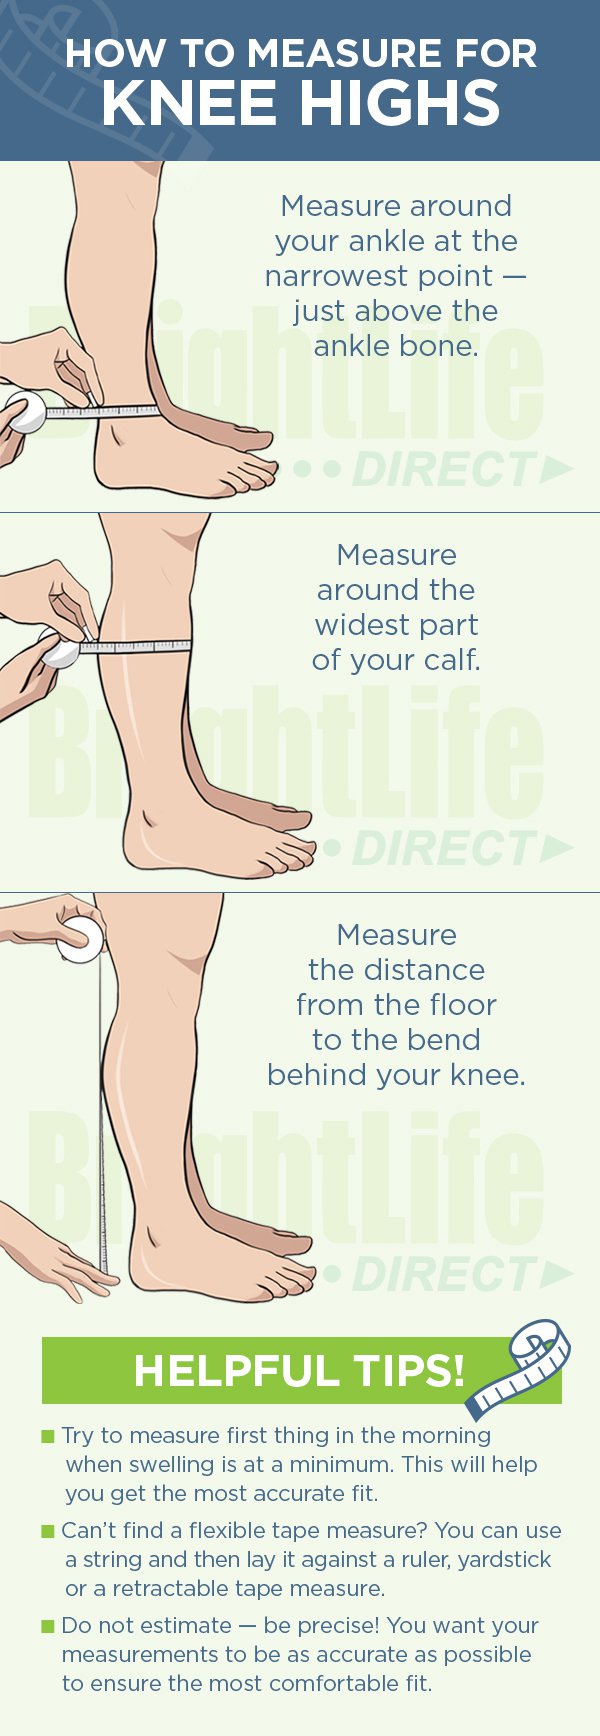 How to Measure Knee High Compression Socks - First measure around your ankle at the slimmest point. Next, measure your calf at the widest point. Finally, measure your lower leg length from the floor to the bend in the knee.